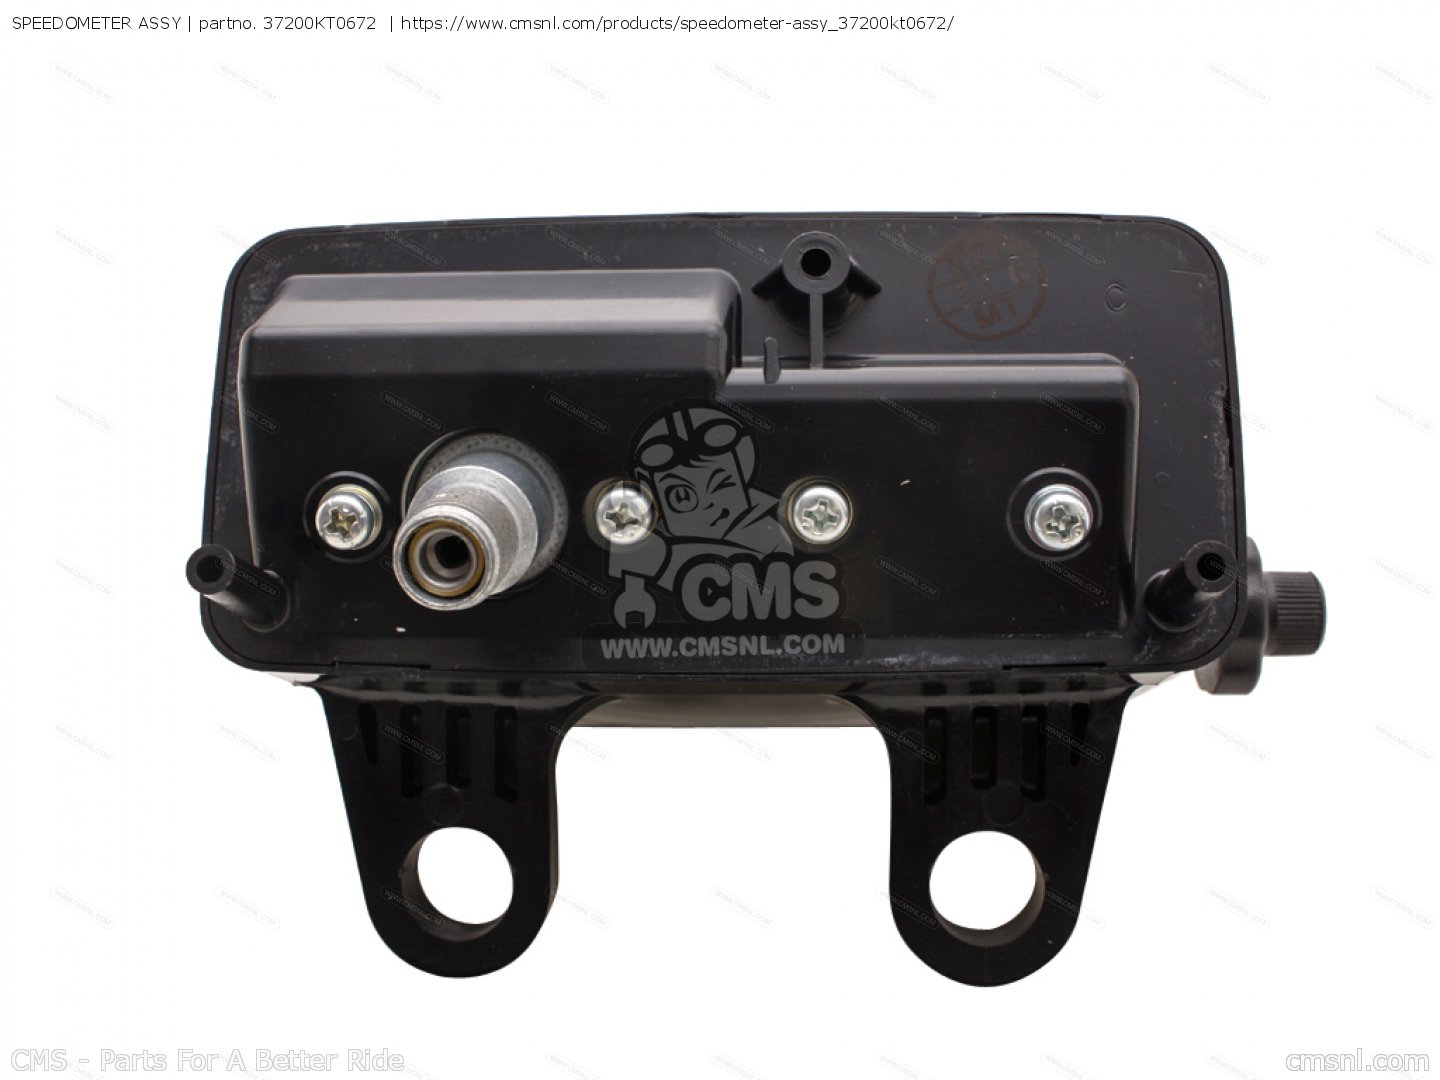 SPEEDOMETER ASSY for XR200R 1998 (W) USA - order at CMSNL